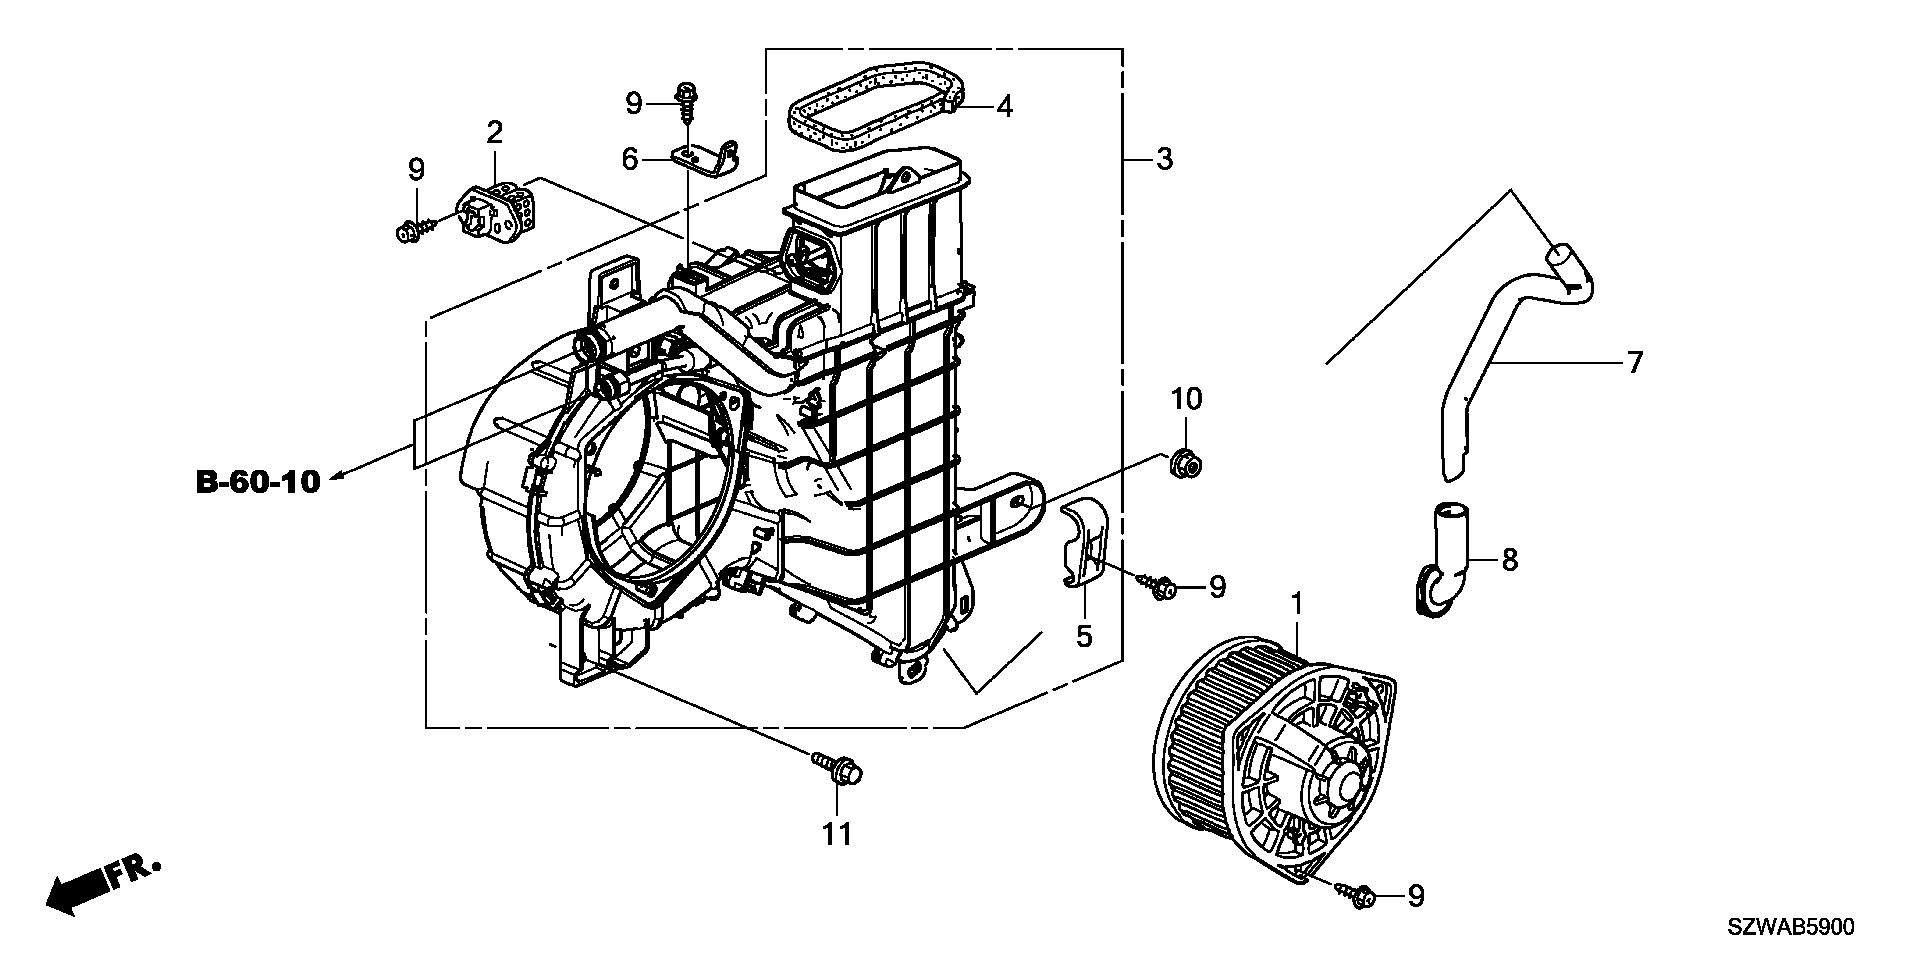 AIR CONDITIONER( REAR COOLING UNIT)